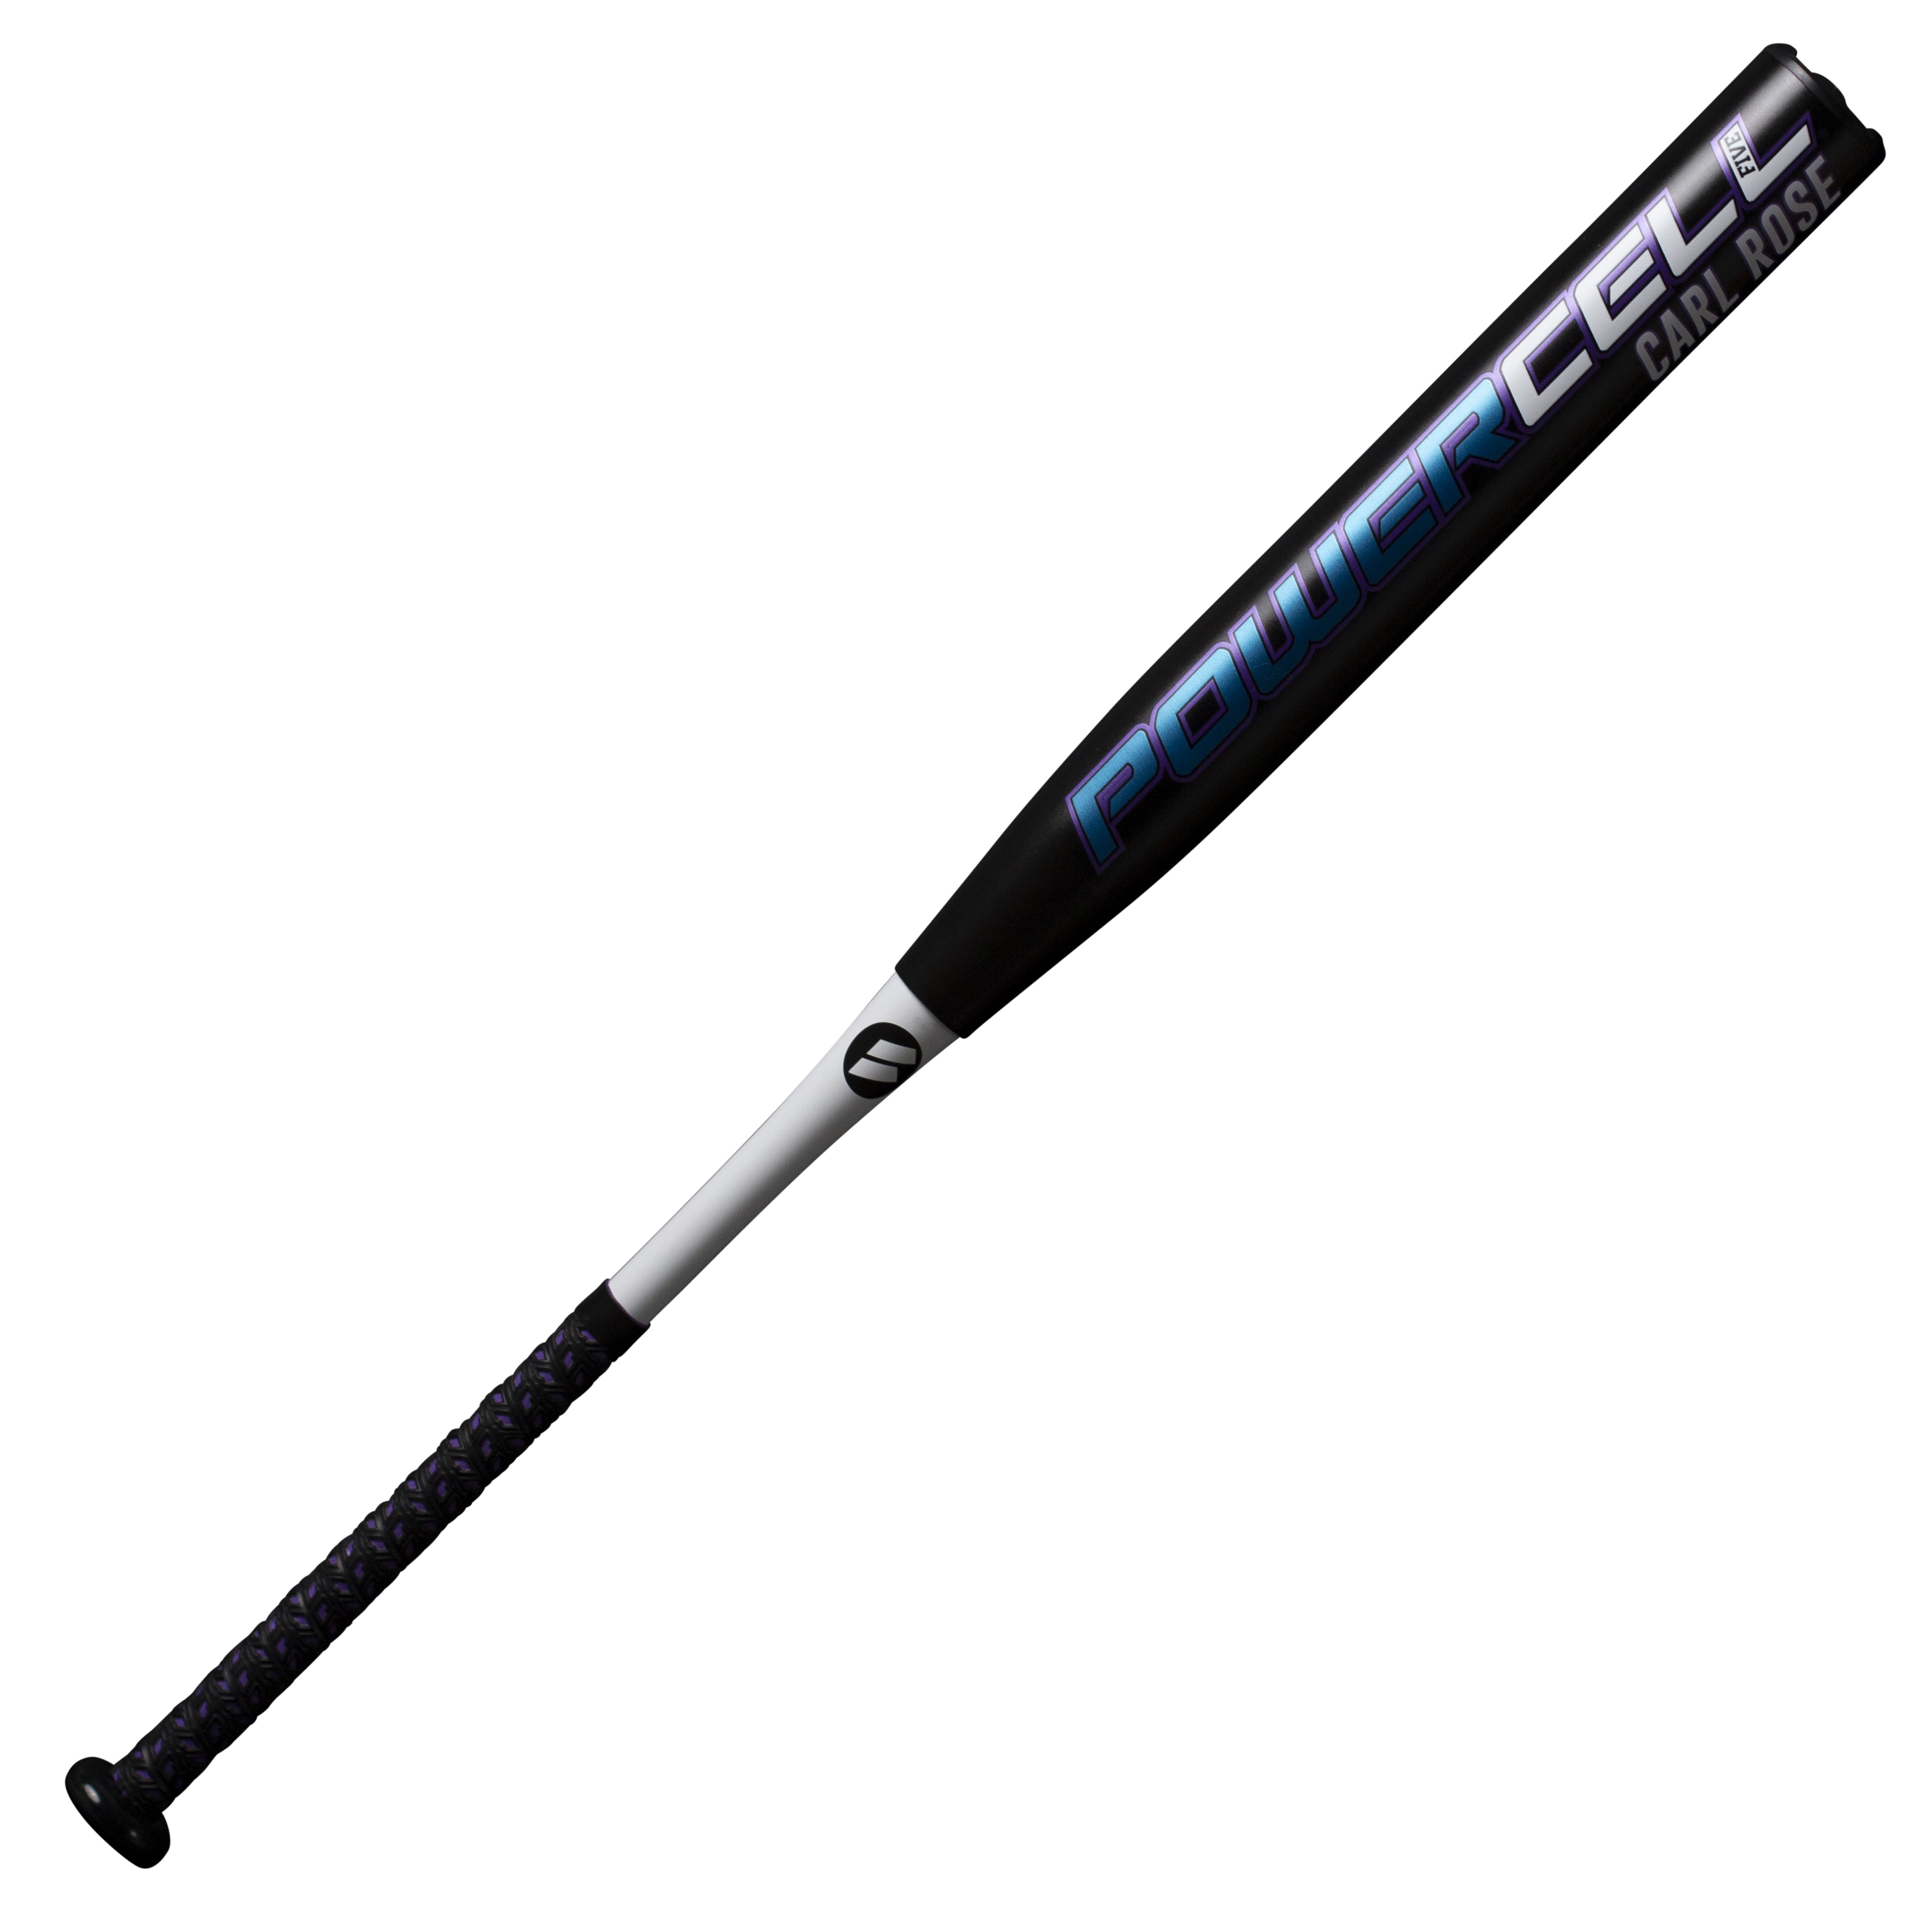 worth-carl-rose-powercell-slowpitch-softball-bat-13-5-usssa-34-inch-28-oz WCARLU-3-28 Worth 043365360945 Worth Softball Bat honoring Carl Rose. The 2021 Worth Slow pitch